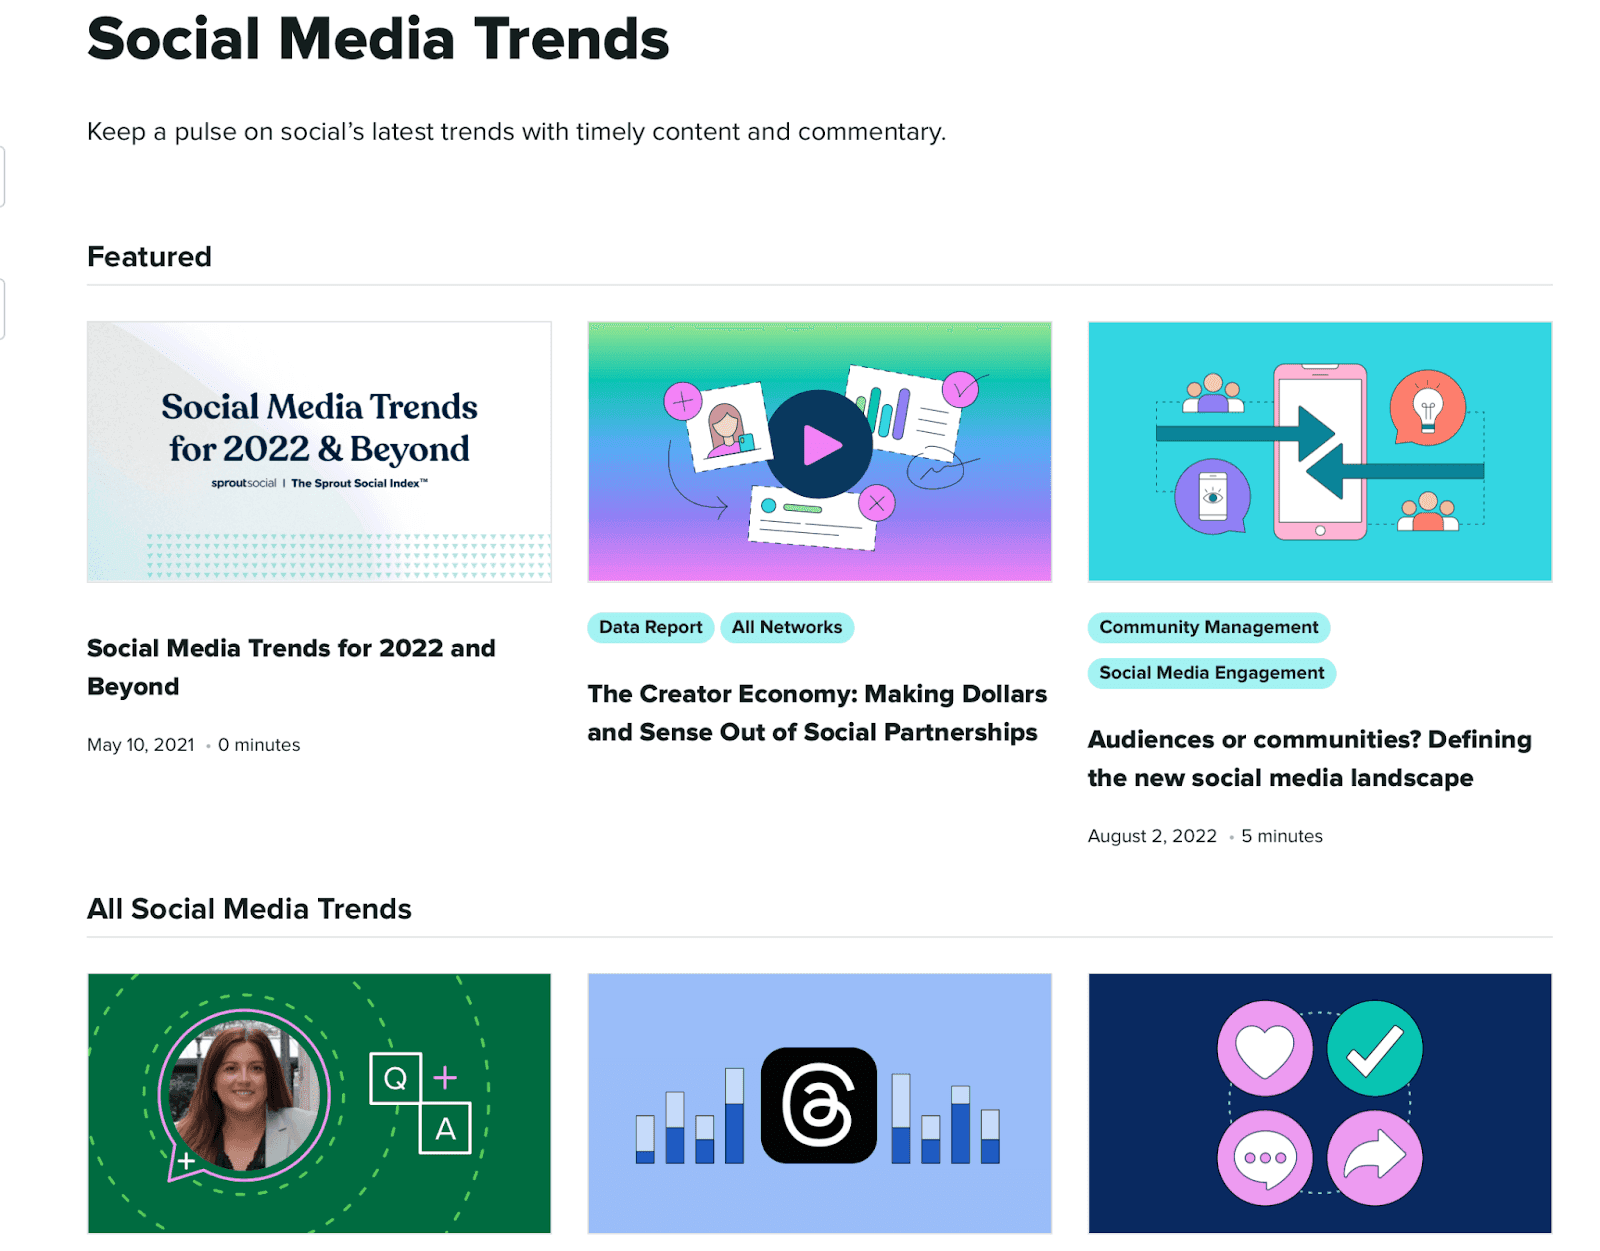 Social Media Trends - keep a pulse on social's latest trends with timely content and commentary